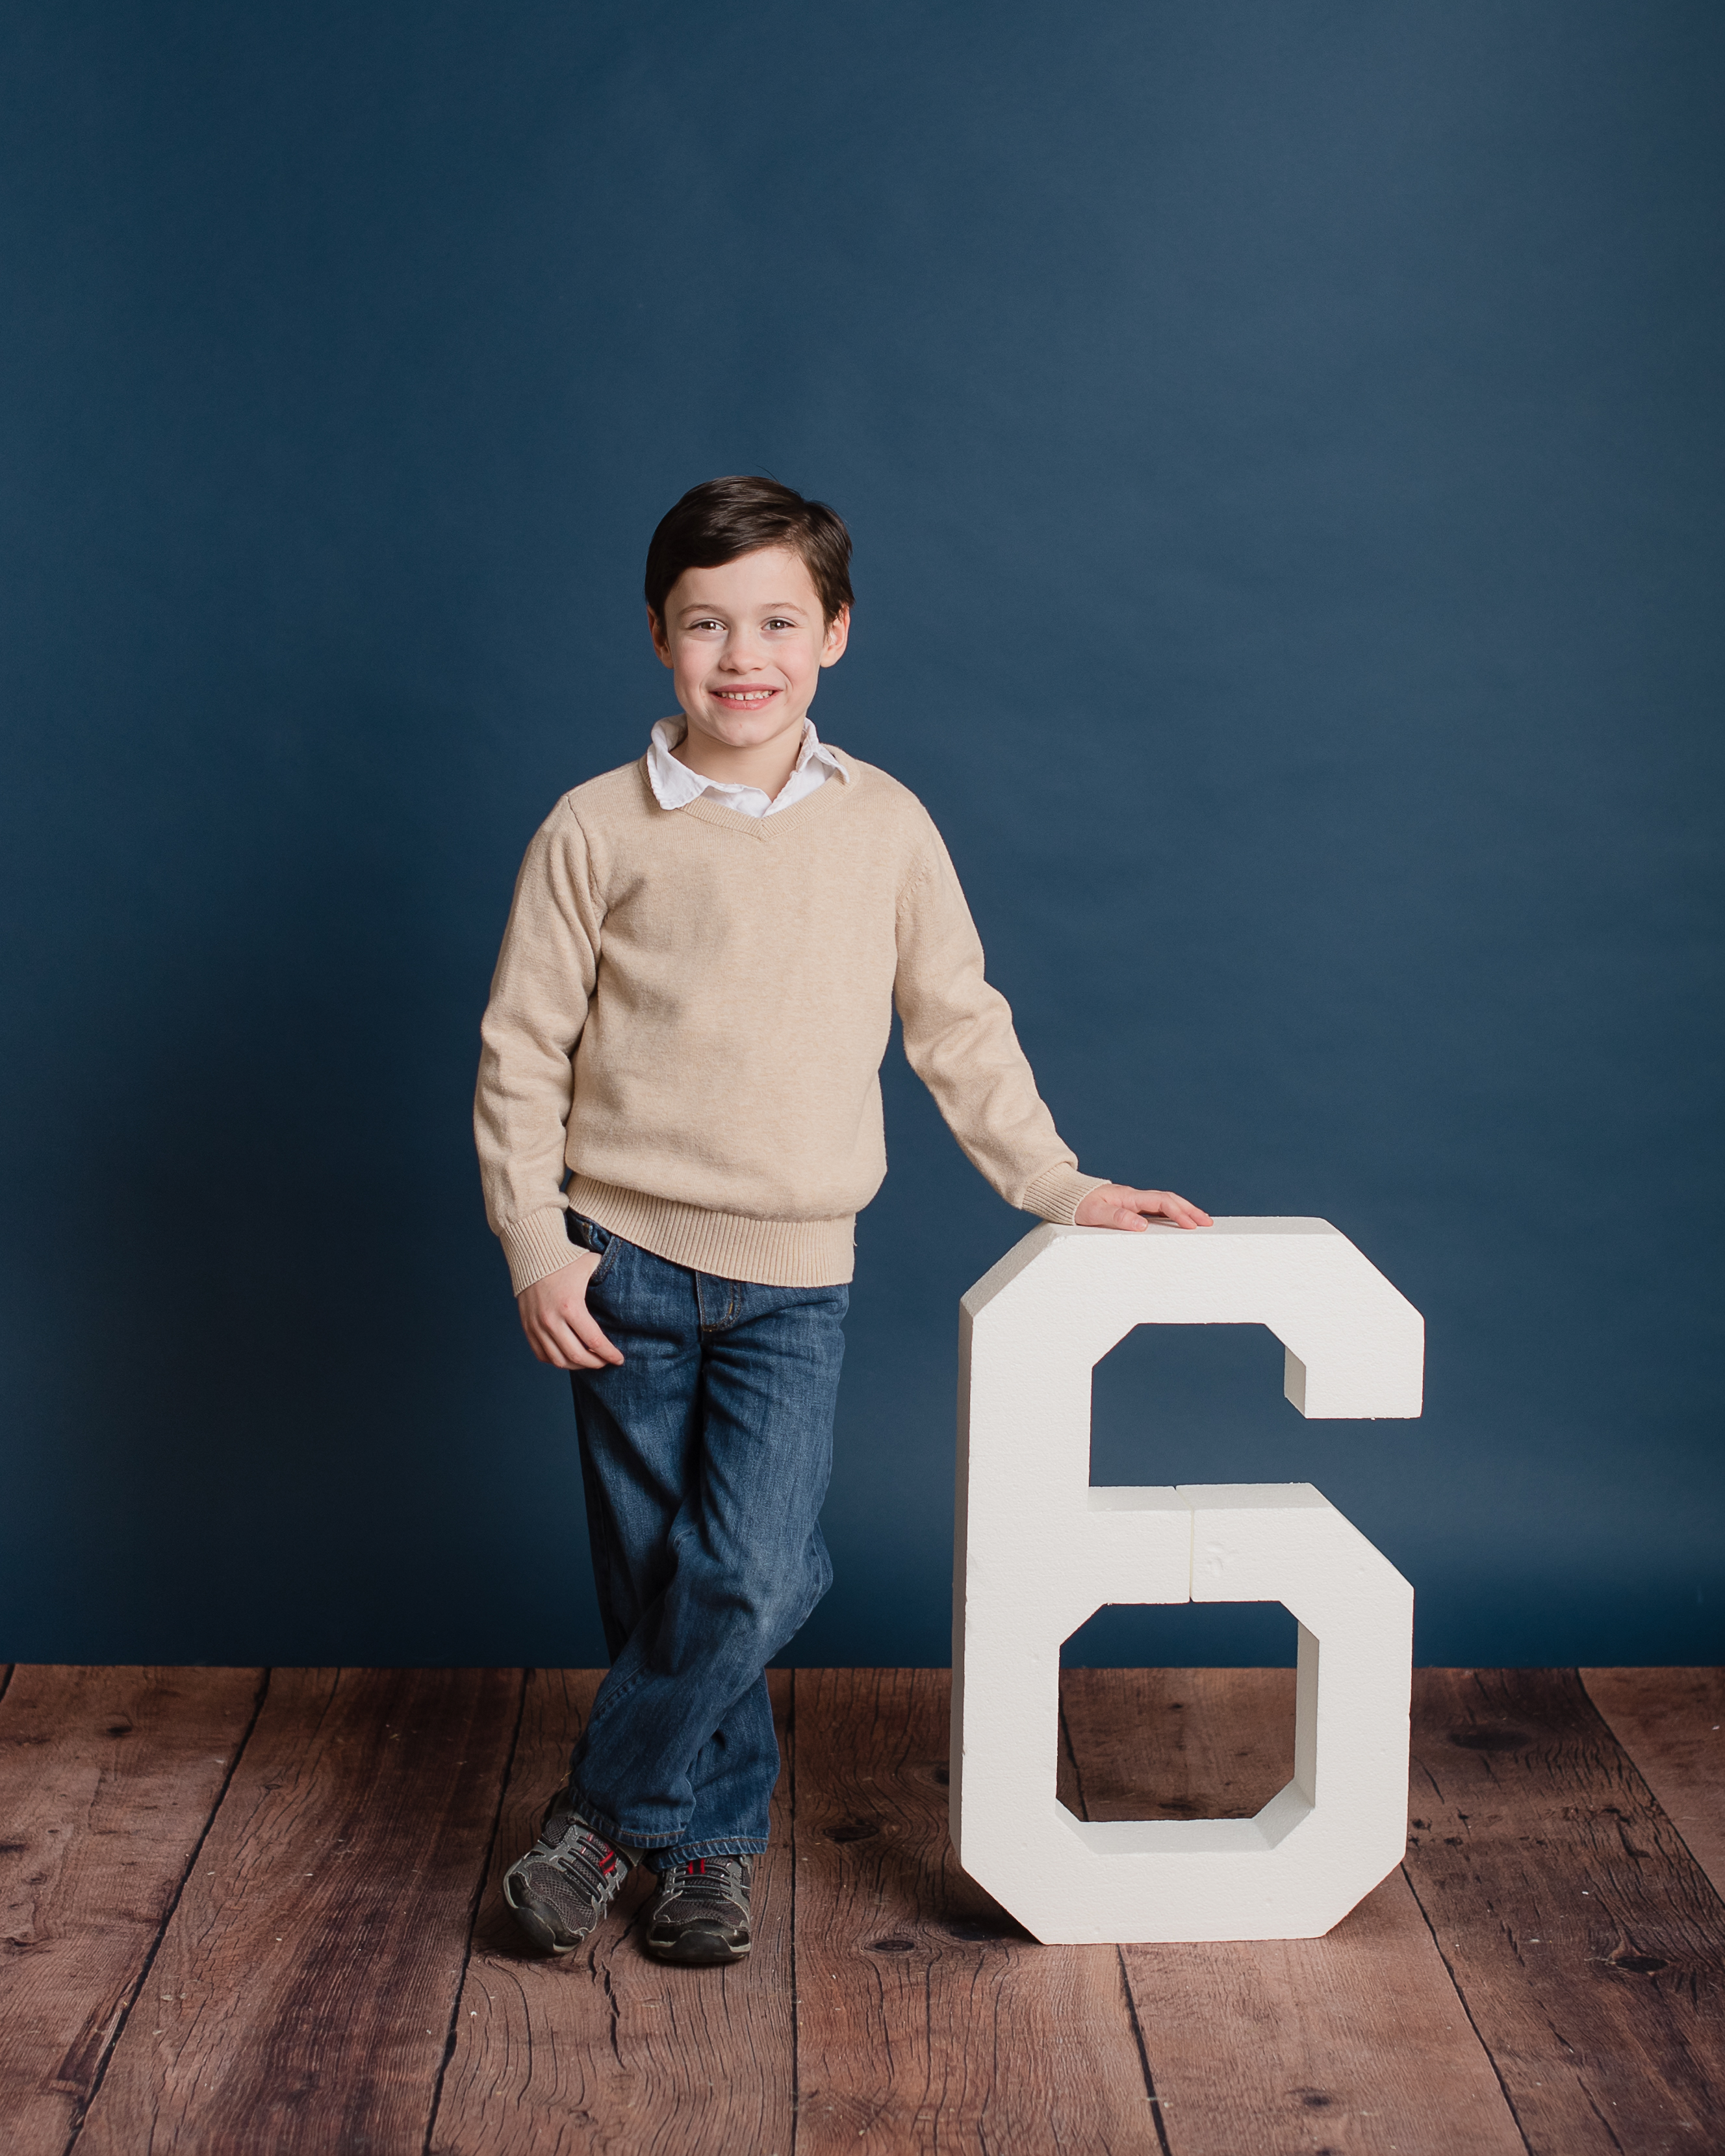 My boys are growing up - lori pickens photography - parkersburg va photographer